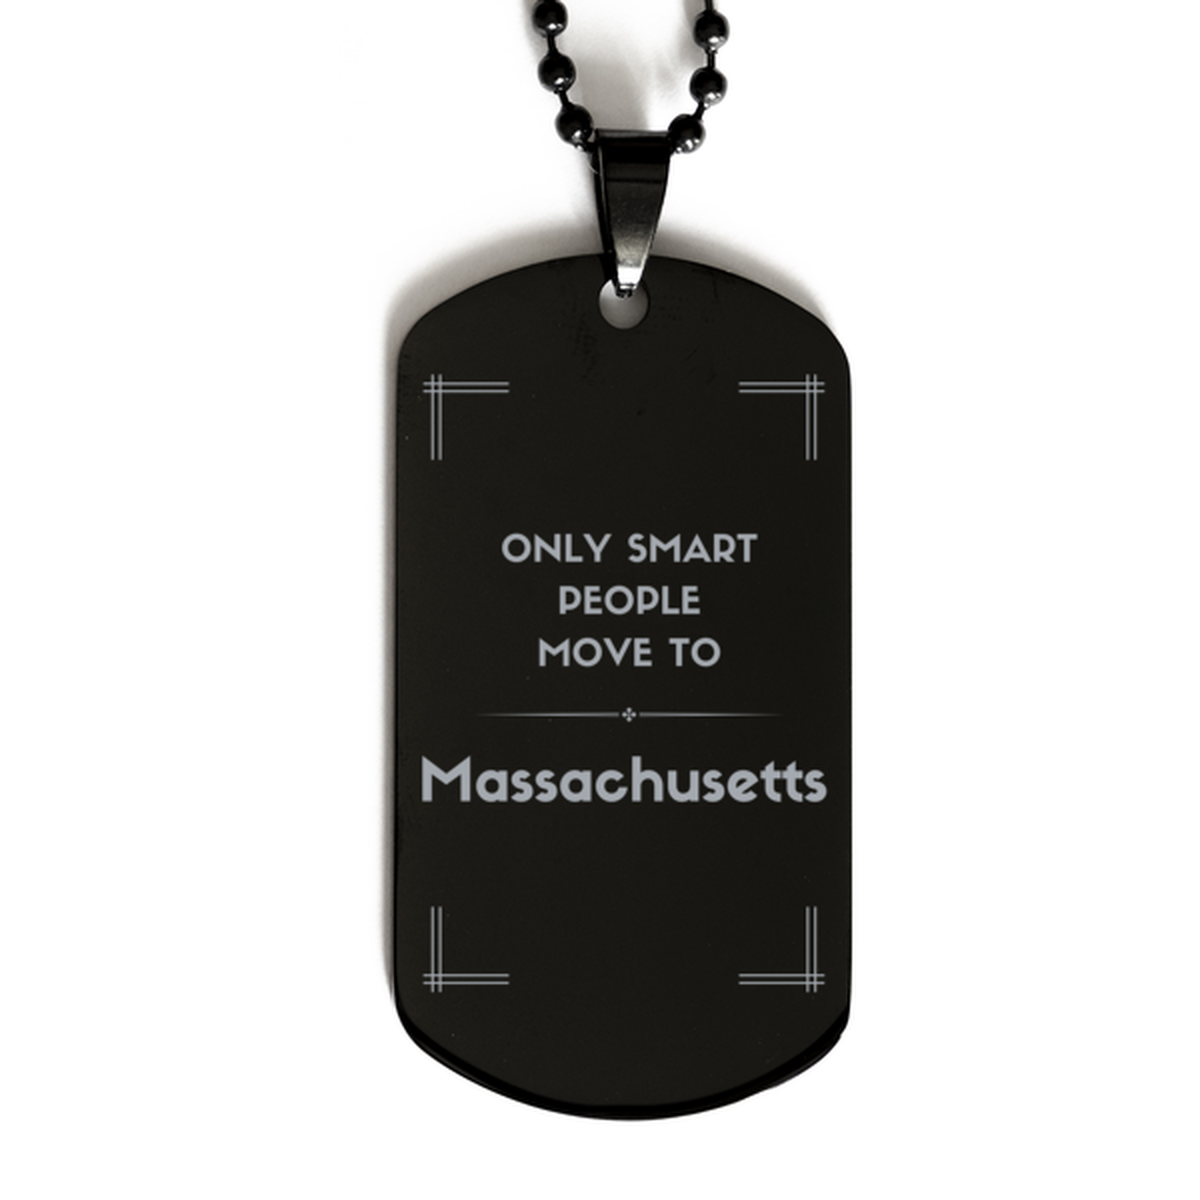 Only smart people move to Massachusetts Black Dog Tag, Gag Gifts For Massachusetts, Move to Massachusetts Gifts for Friends Coworker Funny Saying Quote